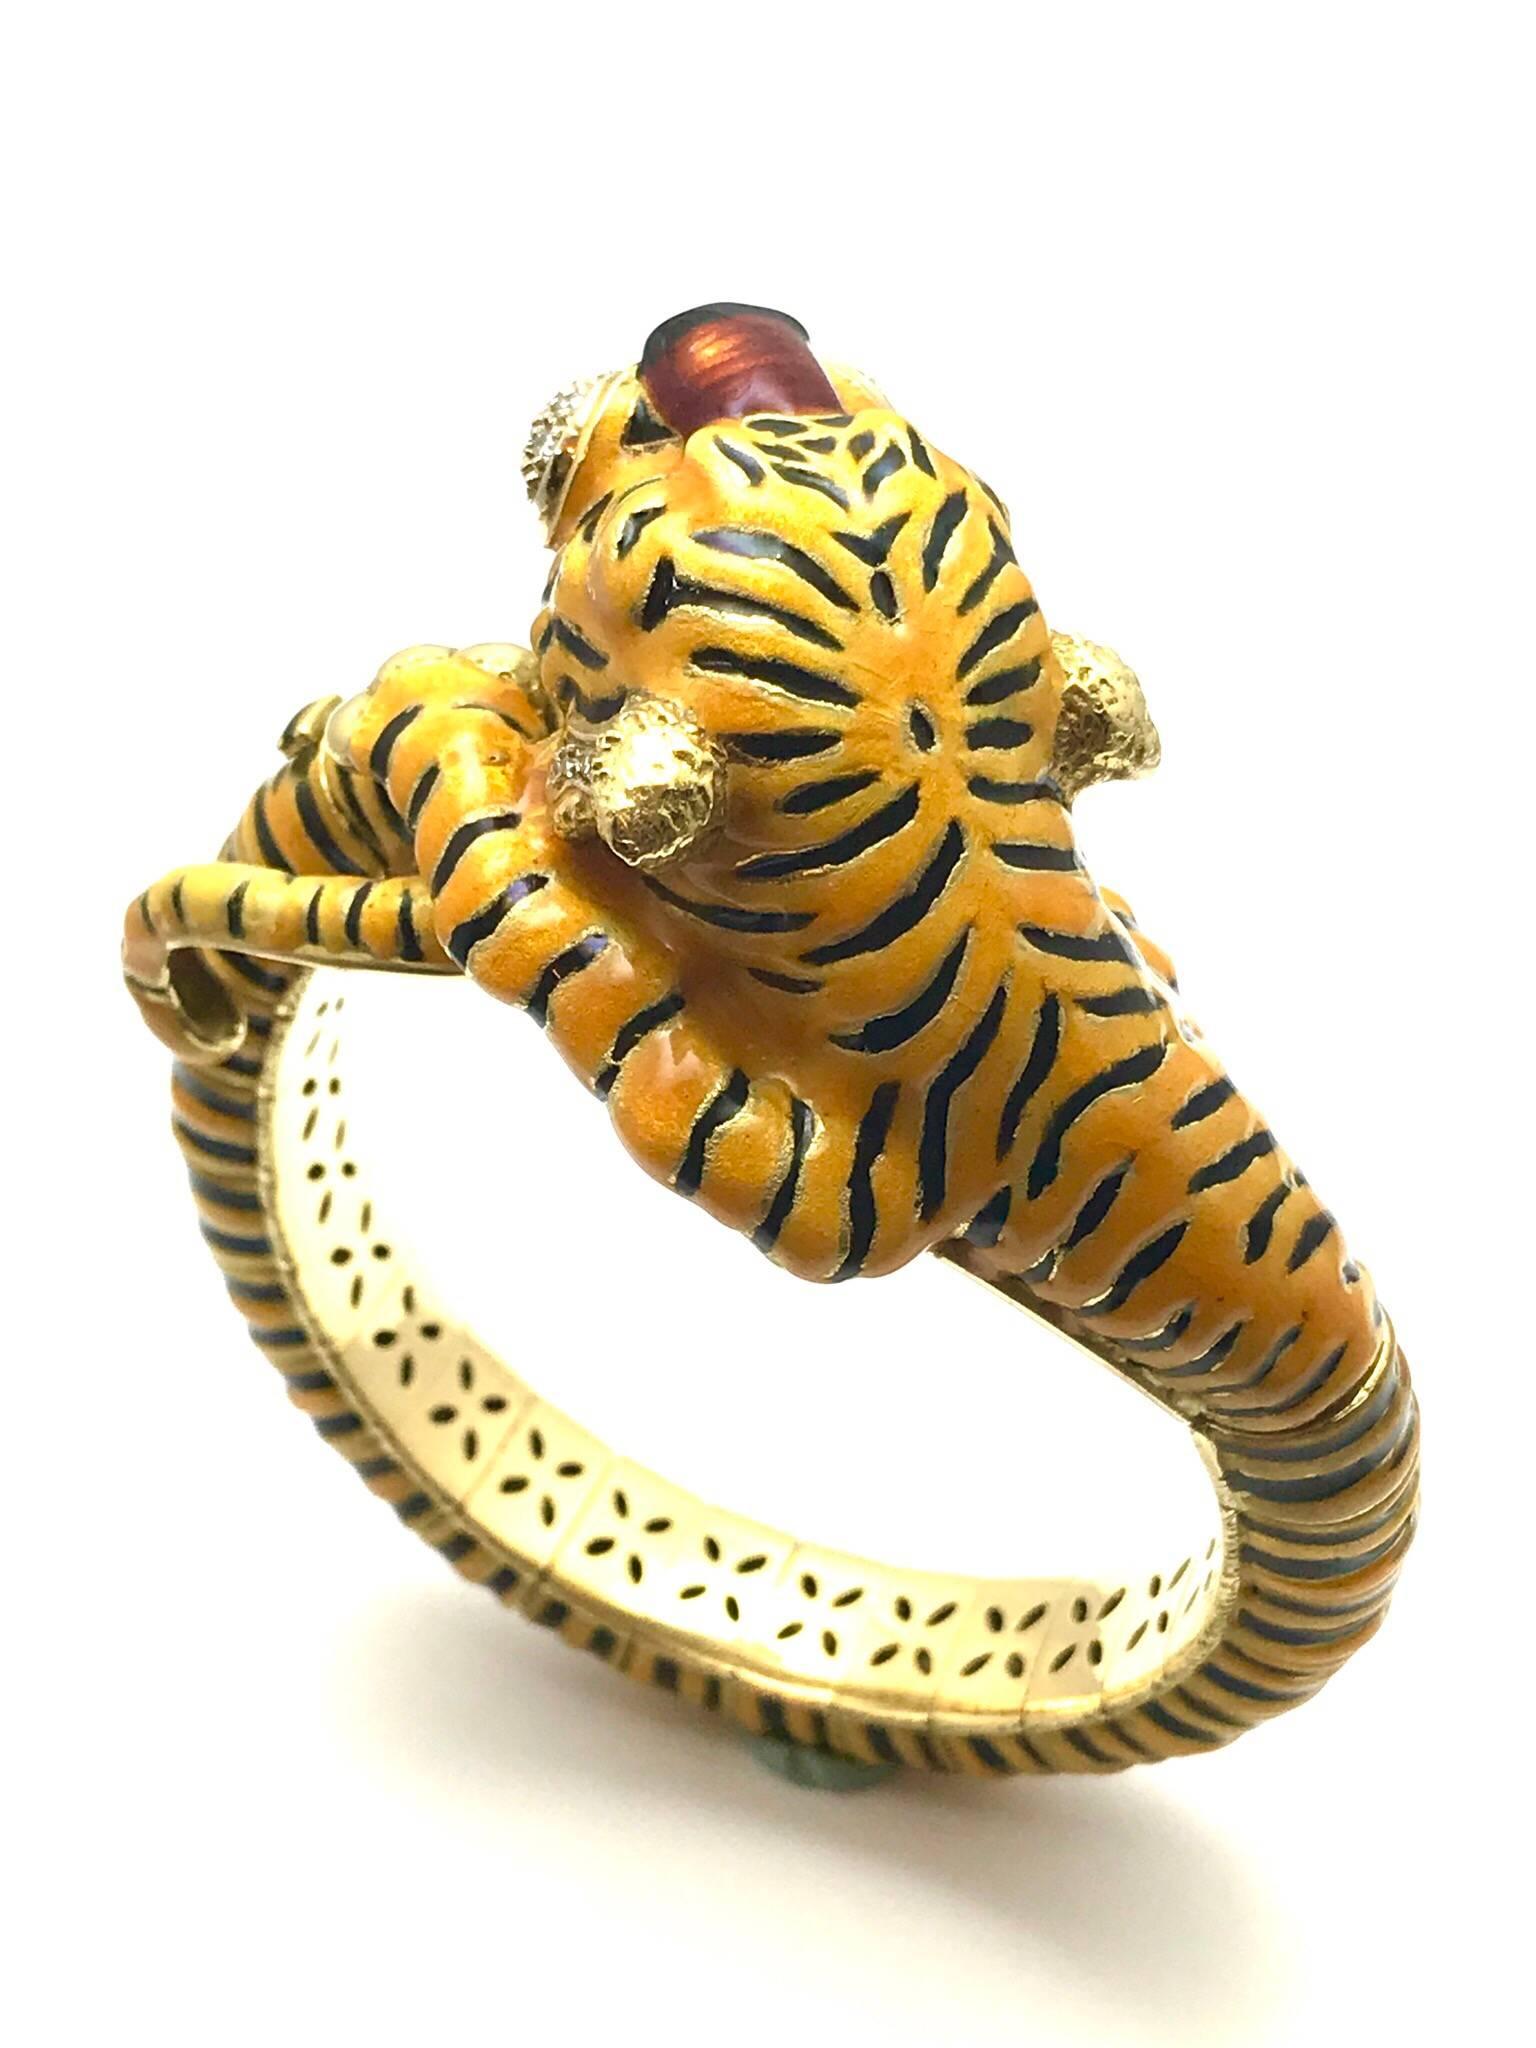 Cartier diamond and enamel 18 karat yellow gold bangle tiger bracelet.  The tiger's mouth and jowls are adorned with 34 single cut round diamonds weighing approximately 0.45 carats.  The bracelet is all 18 kt., applied with yellow/orange enamel and